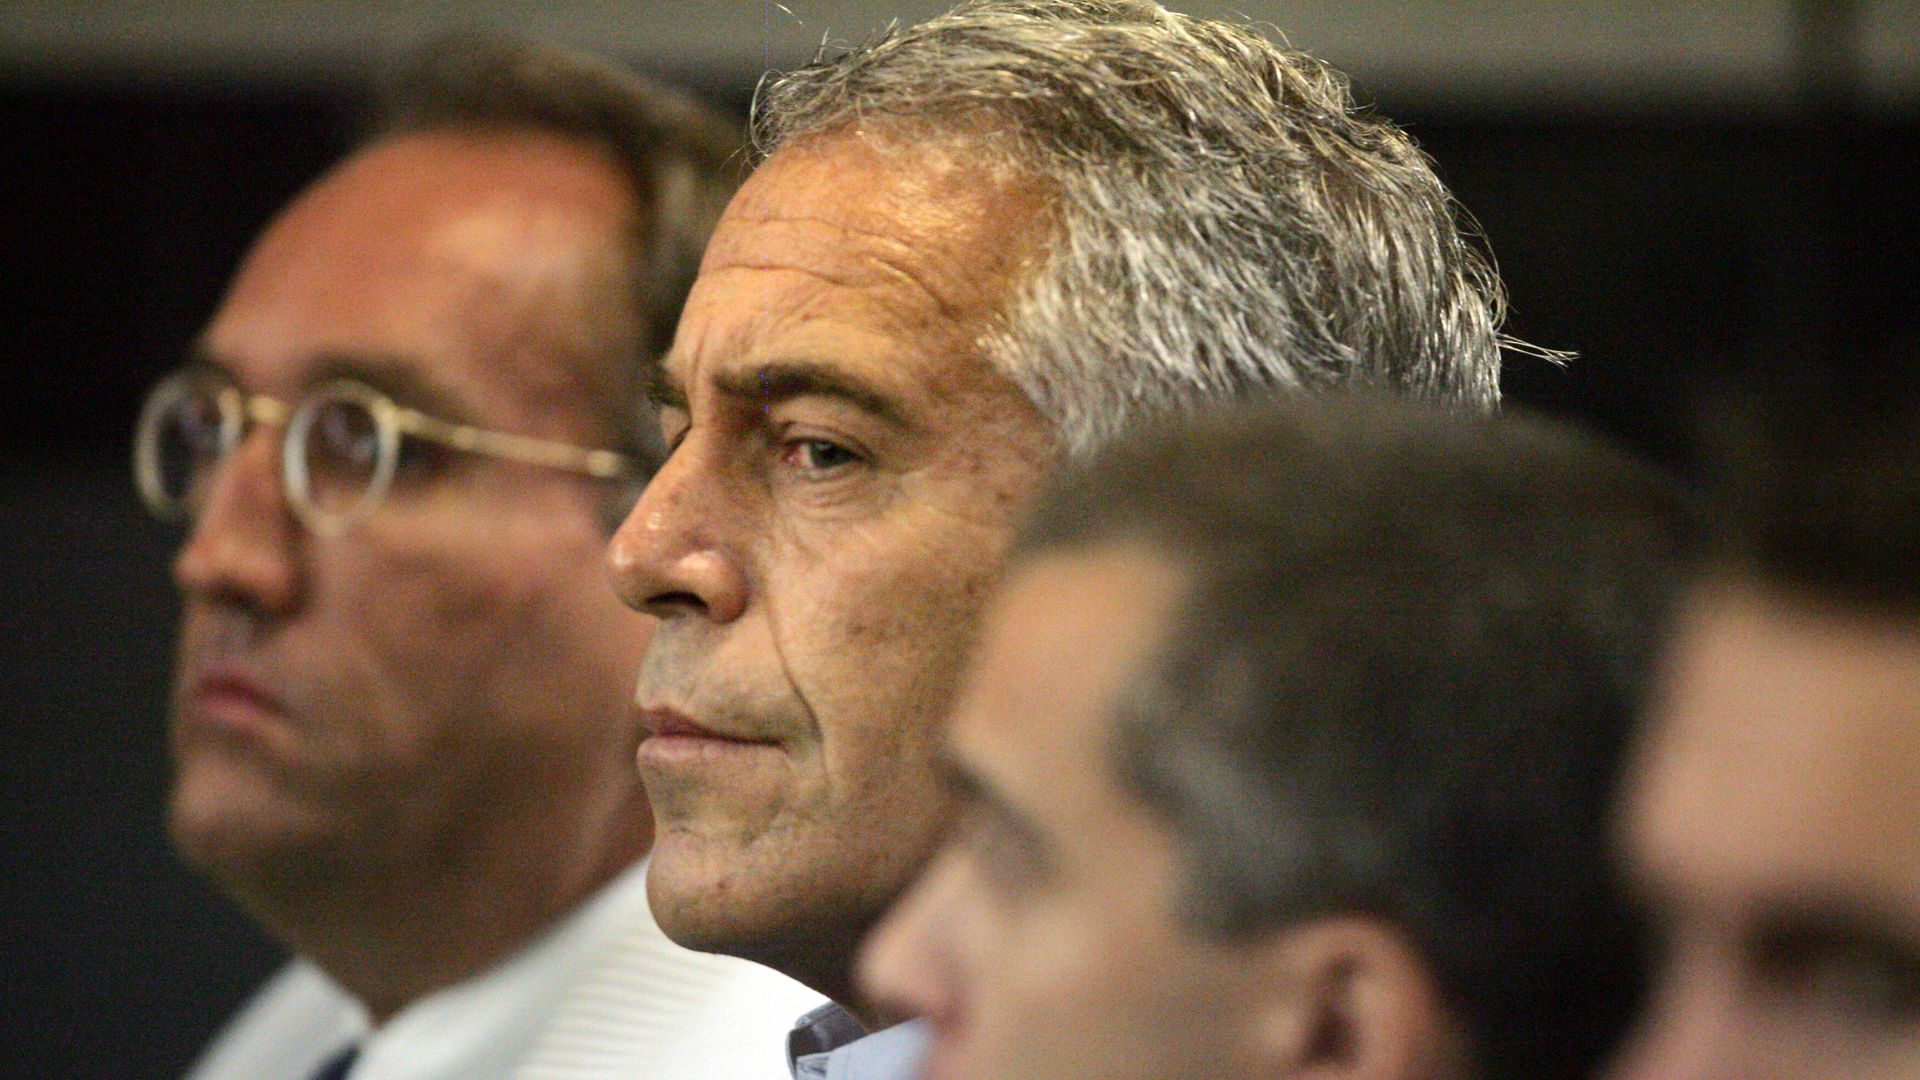 Secret Epstein documents show prosecutors knew about abuse years before plea deal